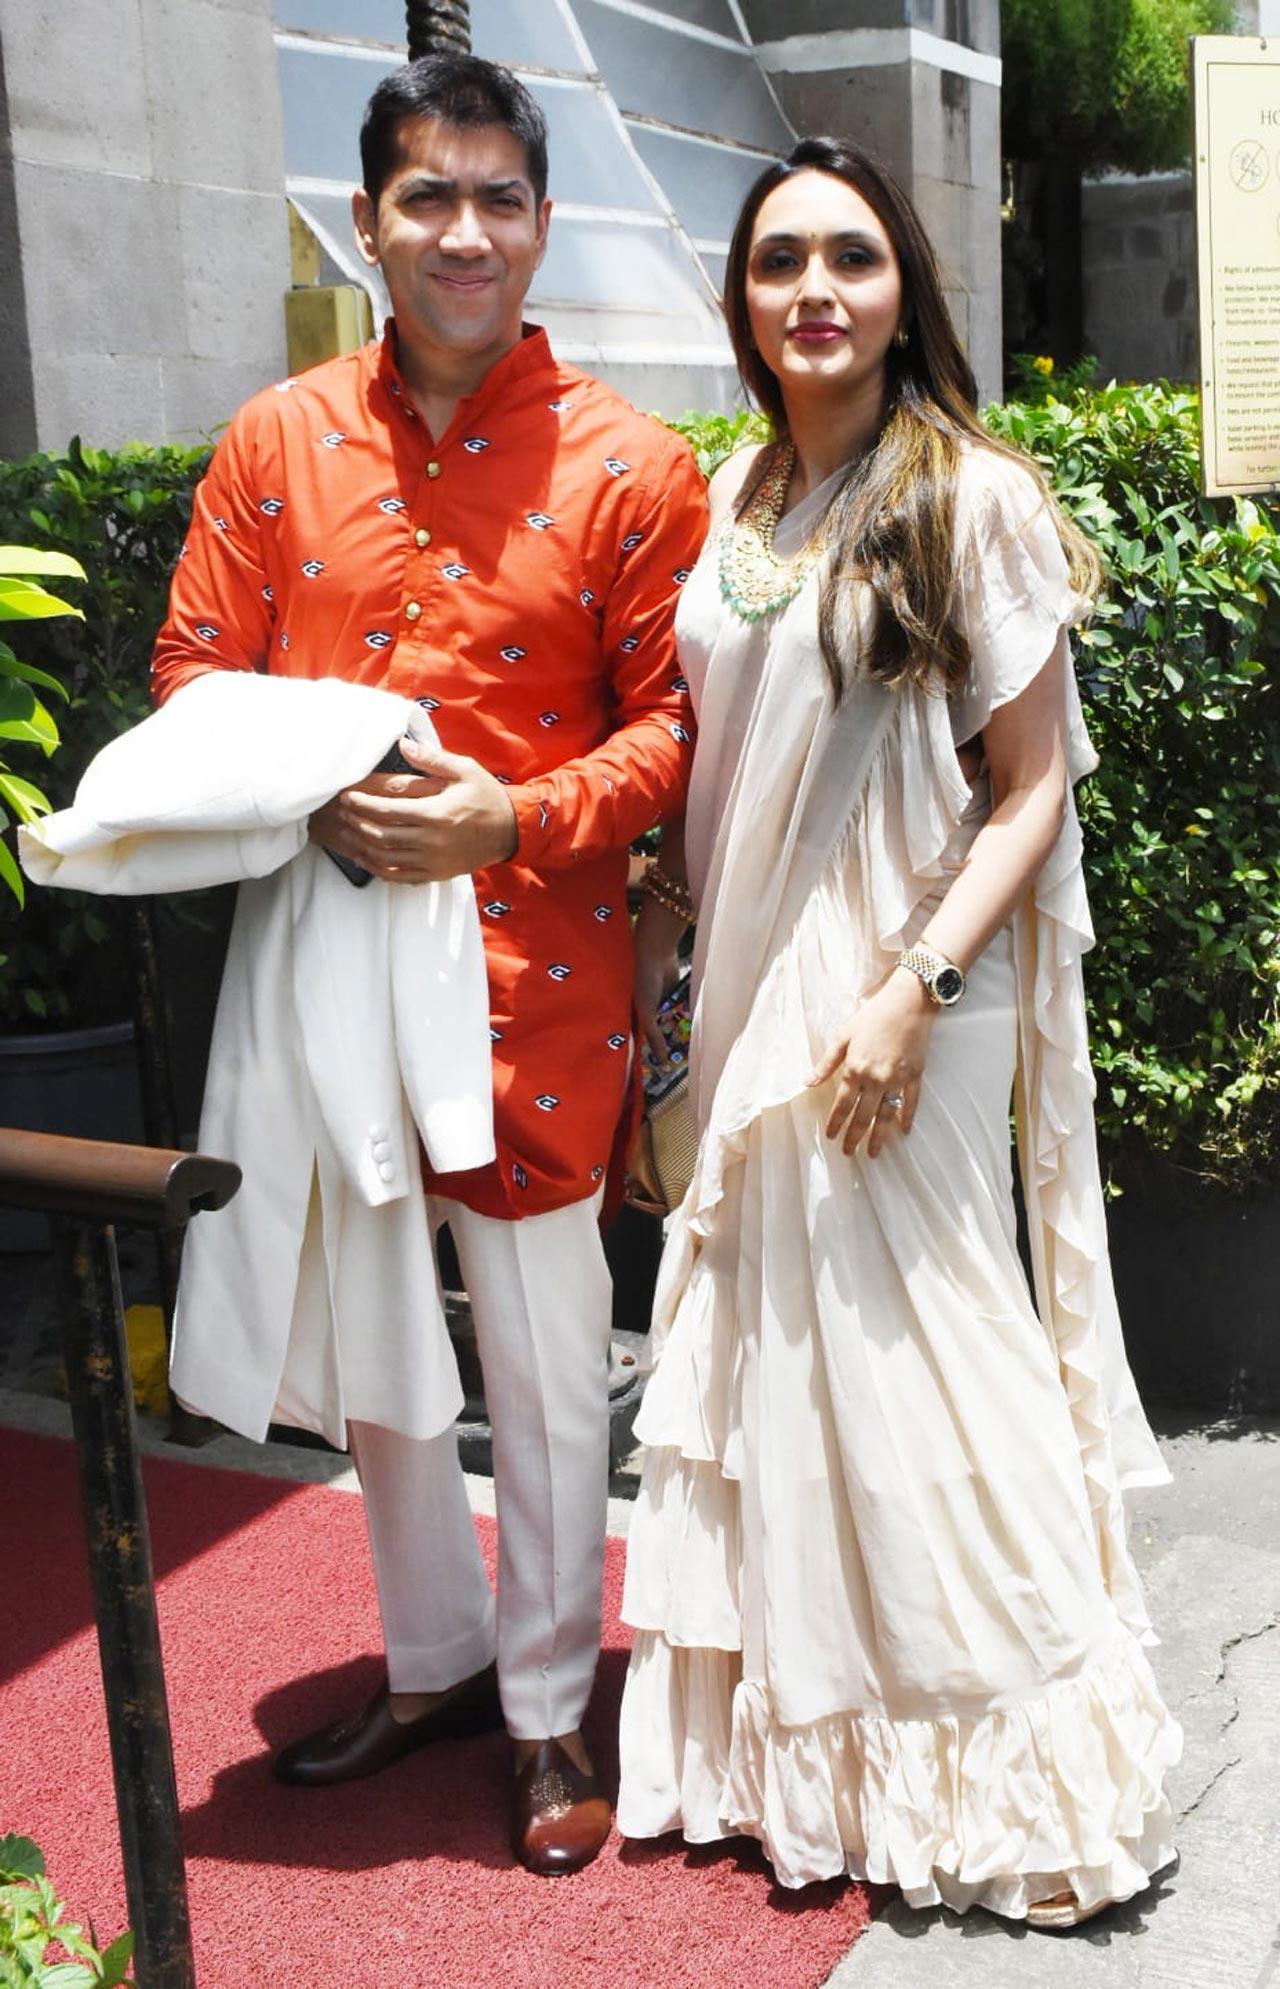 Rohit Dhawan also attended the ceremony with his wife Jaanvi Desai Dhawan. The duo posed for the paparazzi as they walked at the wedding together